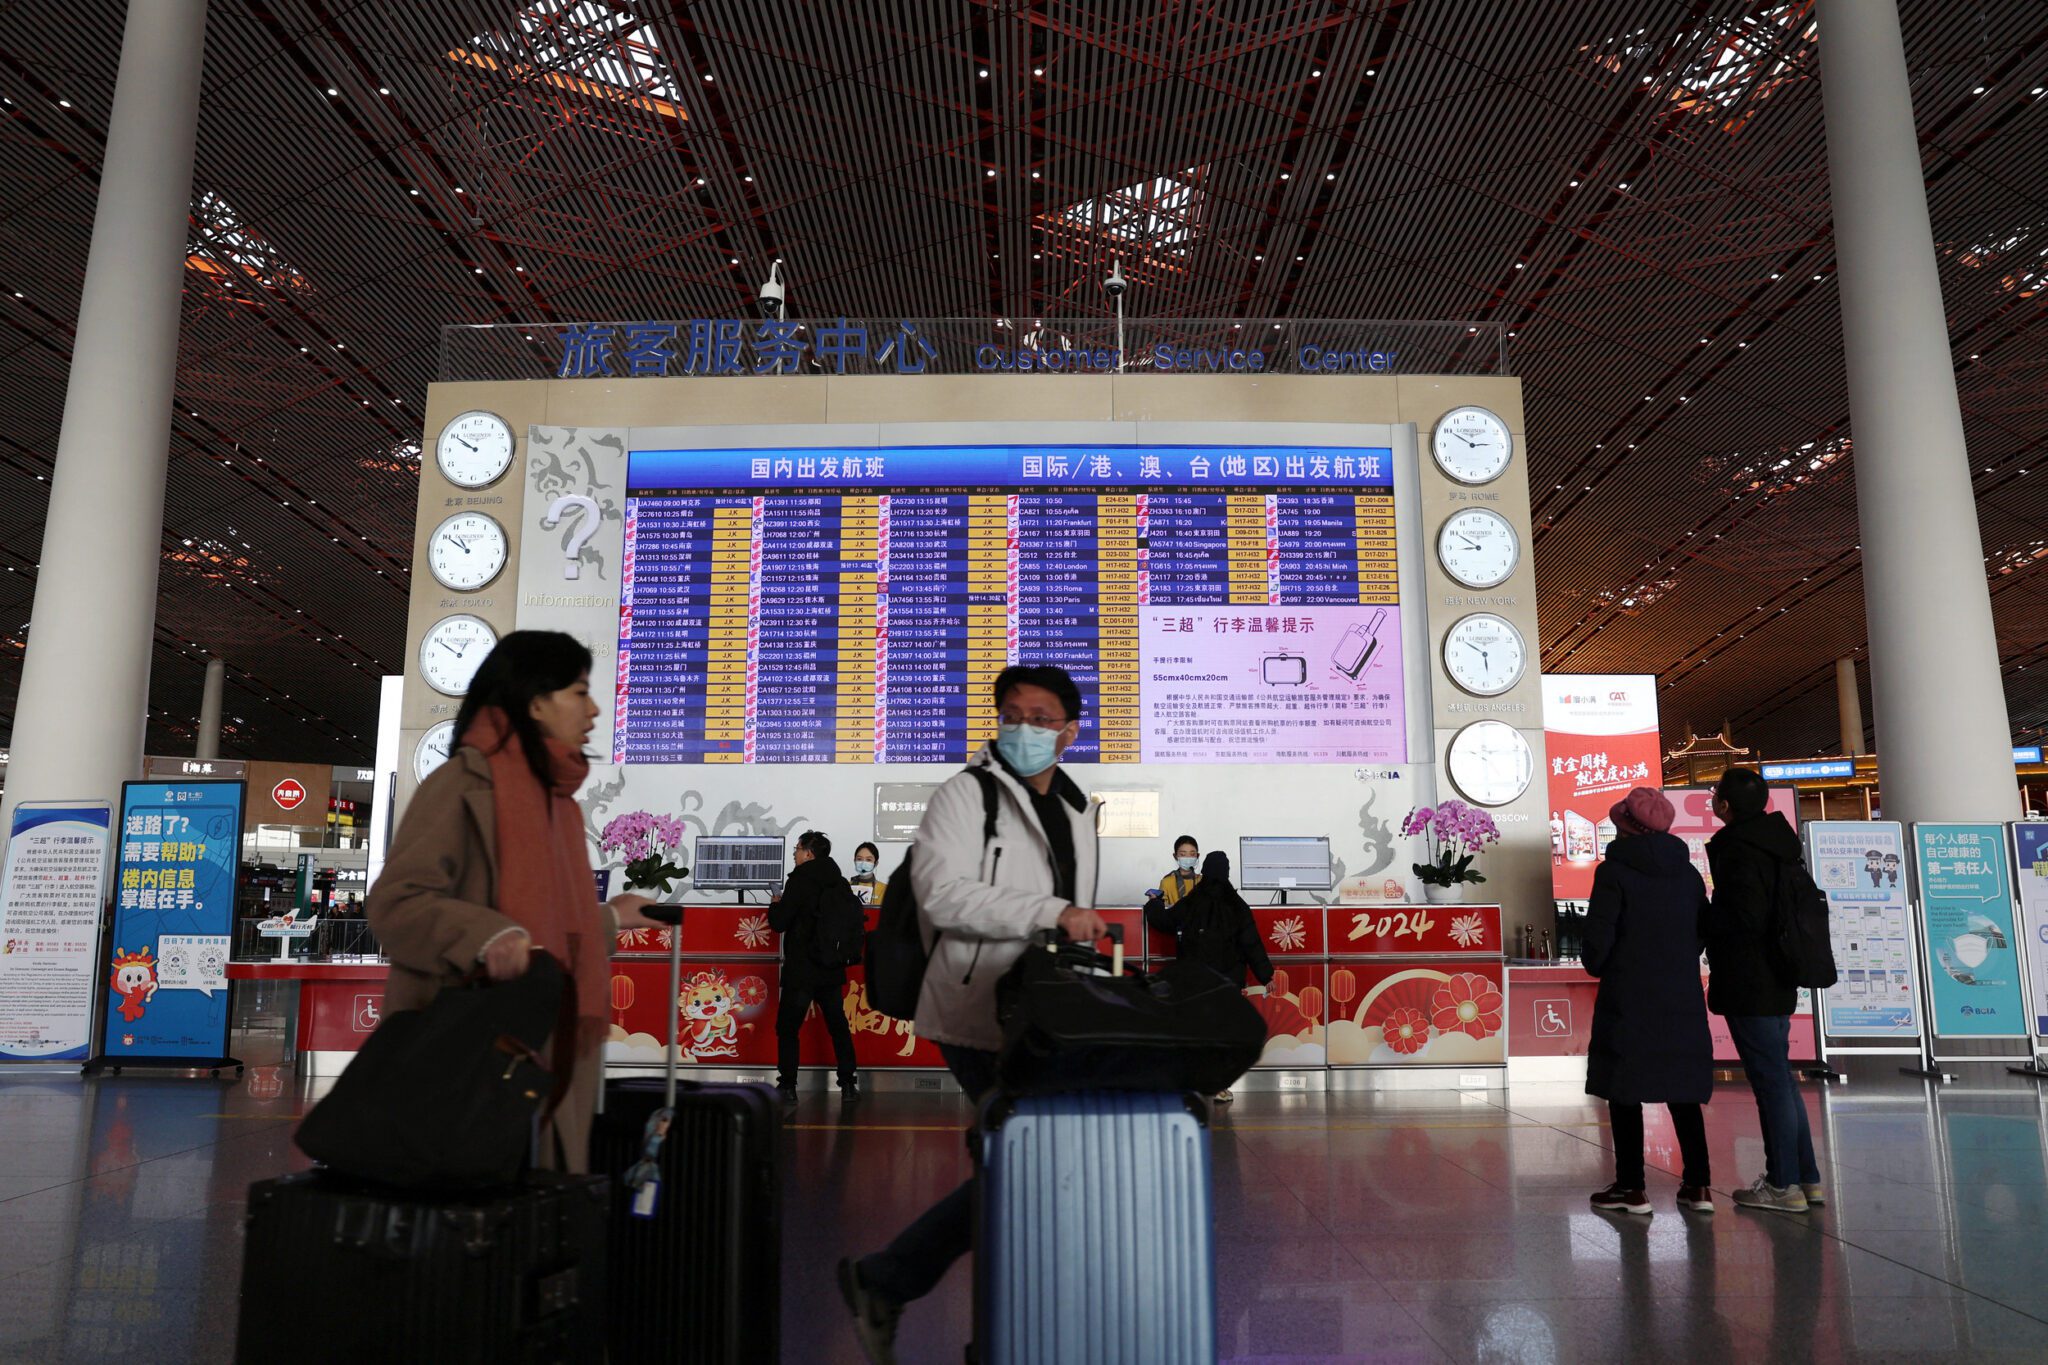 Travellers walk with their luggage past a display showing departure flights information at the Beijing Capital International Airport, during the Spring Festival travel rush ahead of the Chinese Lunar New Year, in Beijing, China February 2, 2024. REUTERS/Florence Lo/File photo